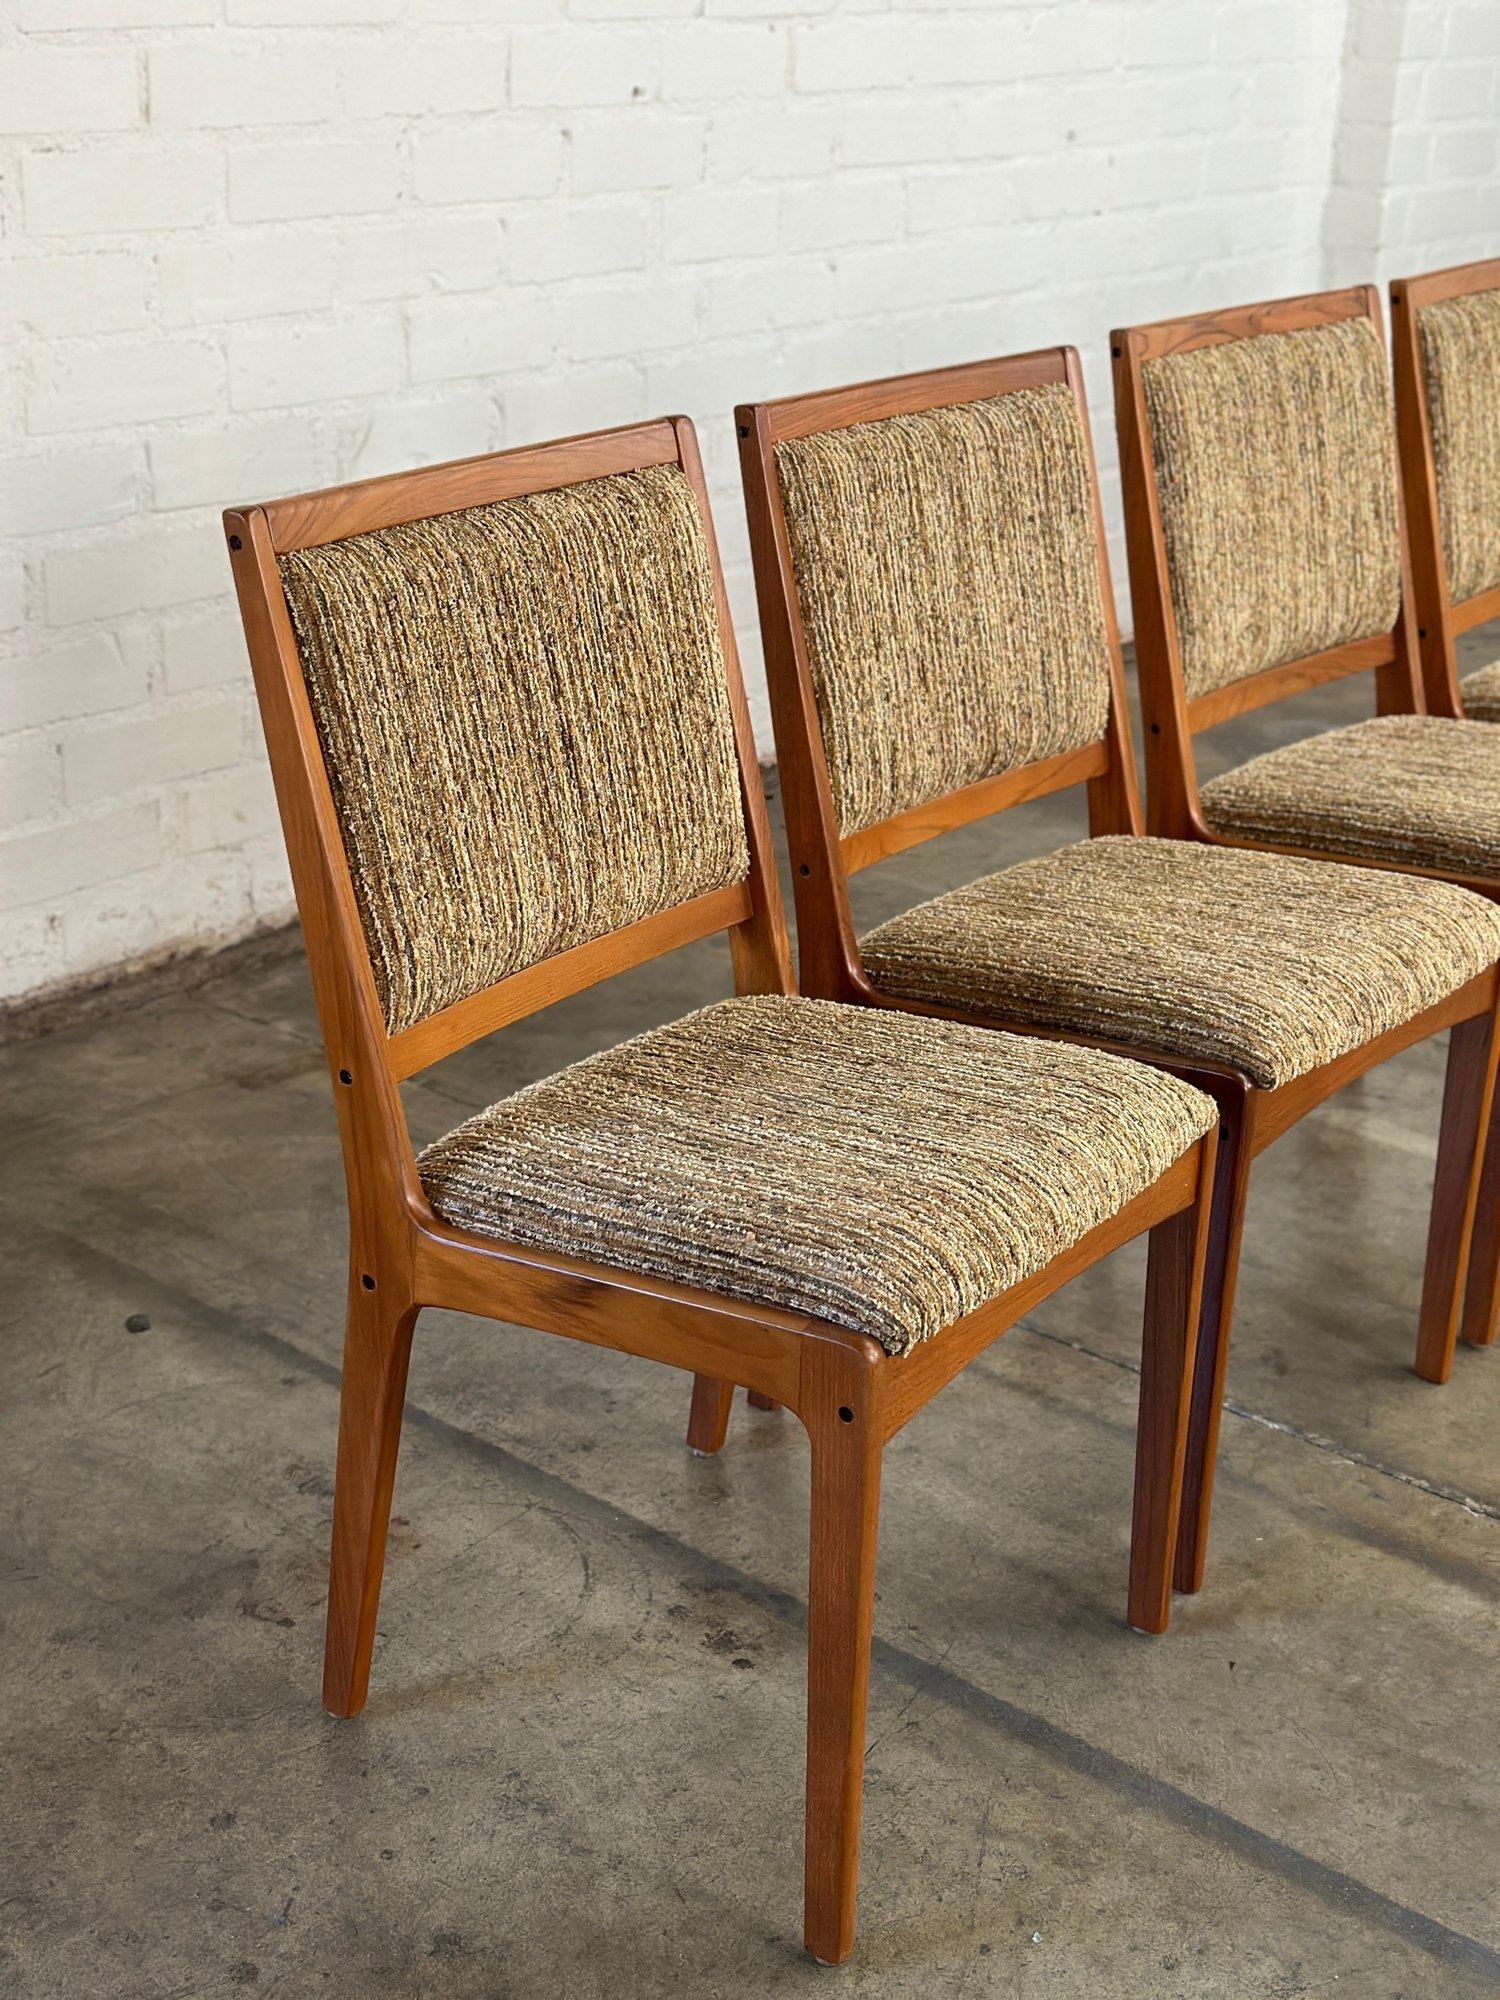 W19 D19 H33 SW16.5 SD17 SH18

Fully Restored Teak Dining Chairs with Fresh Upholstery. Chairs have fresh fun nubby soft tweed fabric. Chairs are all sturdy and sound with no major areas of wear. Price is for the set of six. 